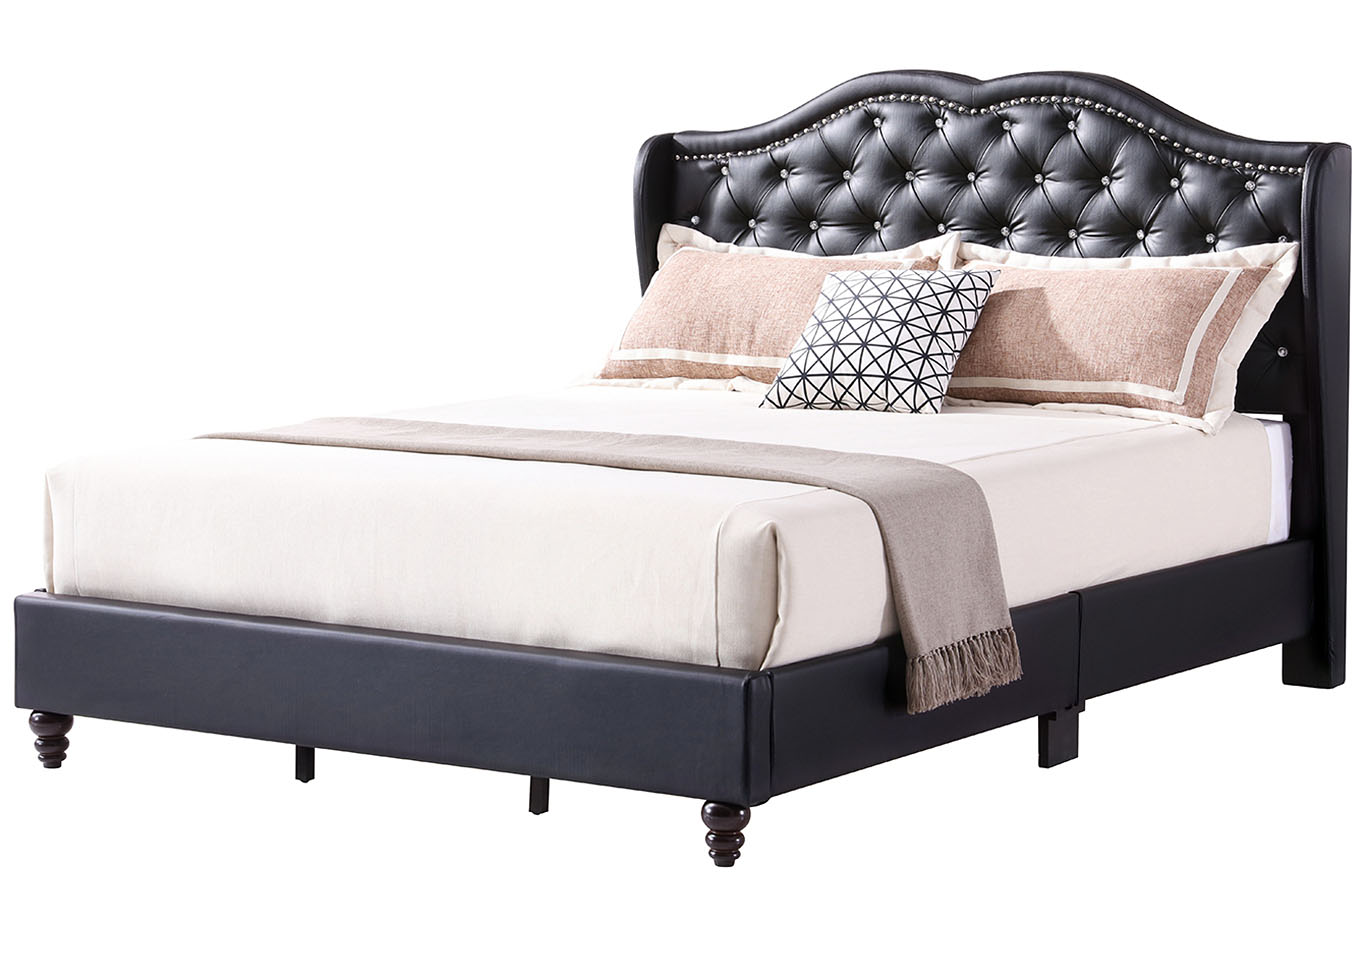 Black Faux Leather Upholstered King Bed,Glory Furniture